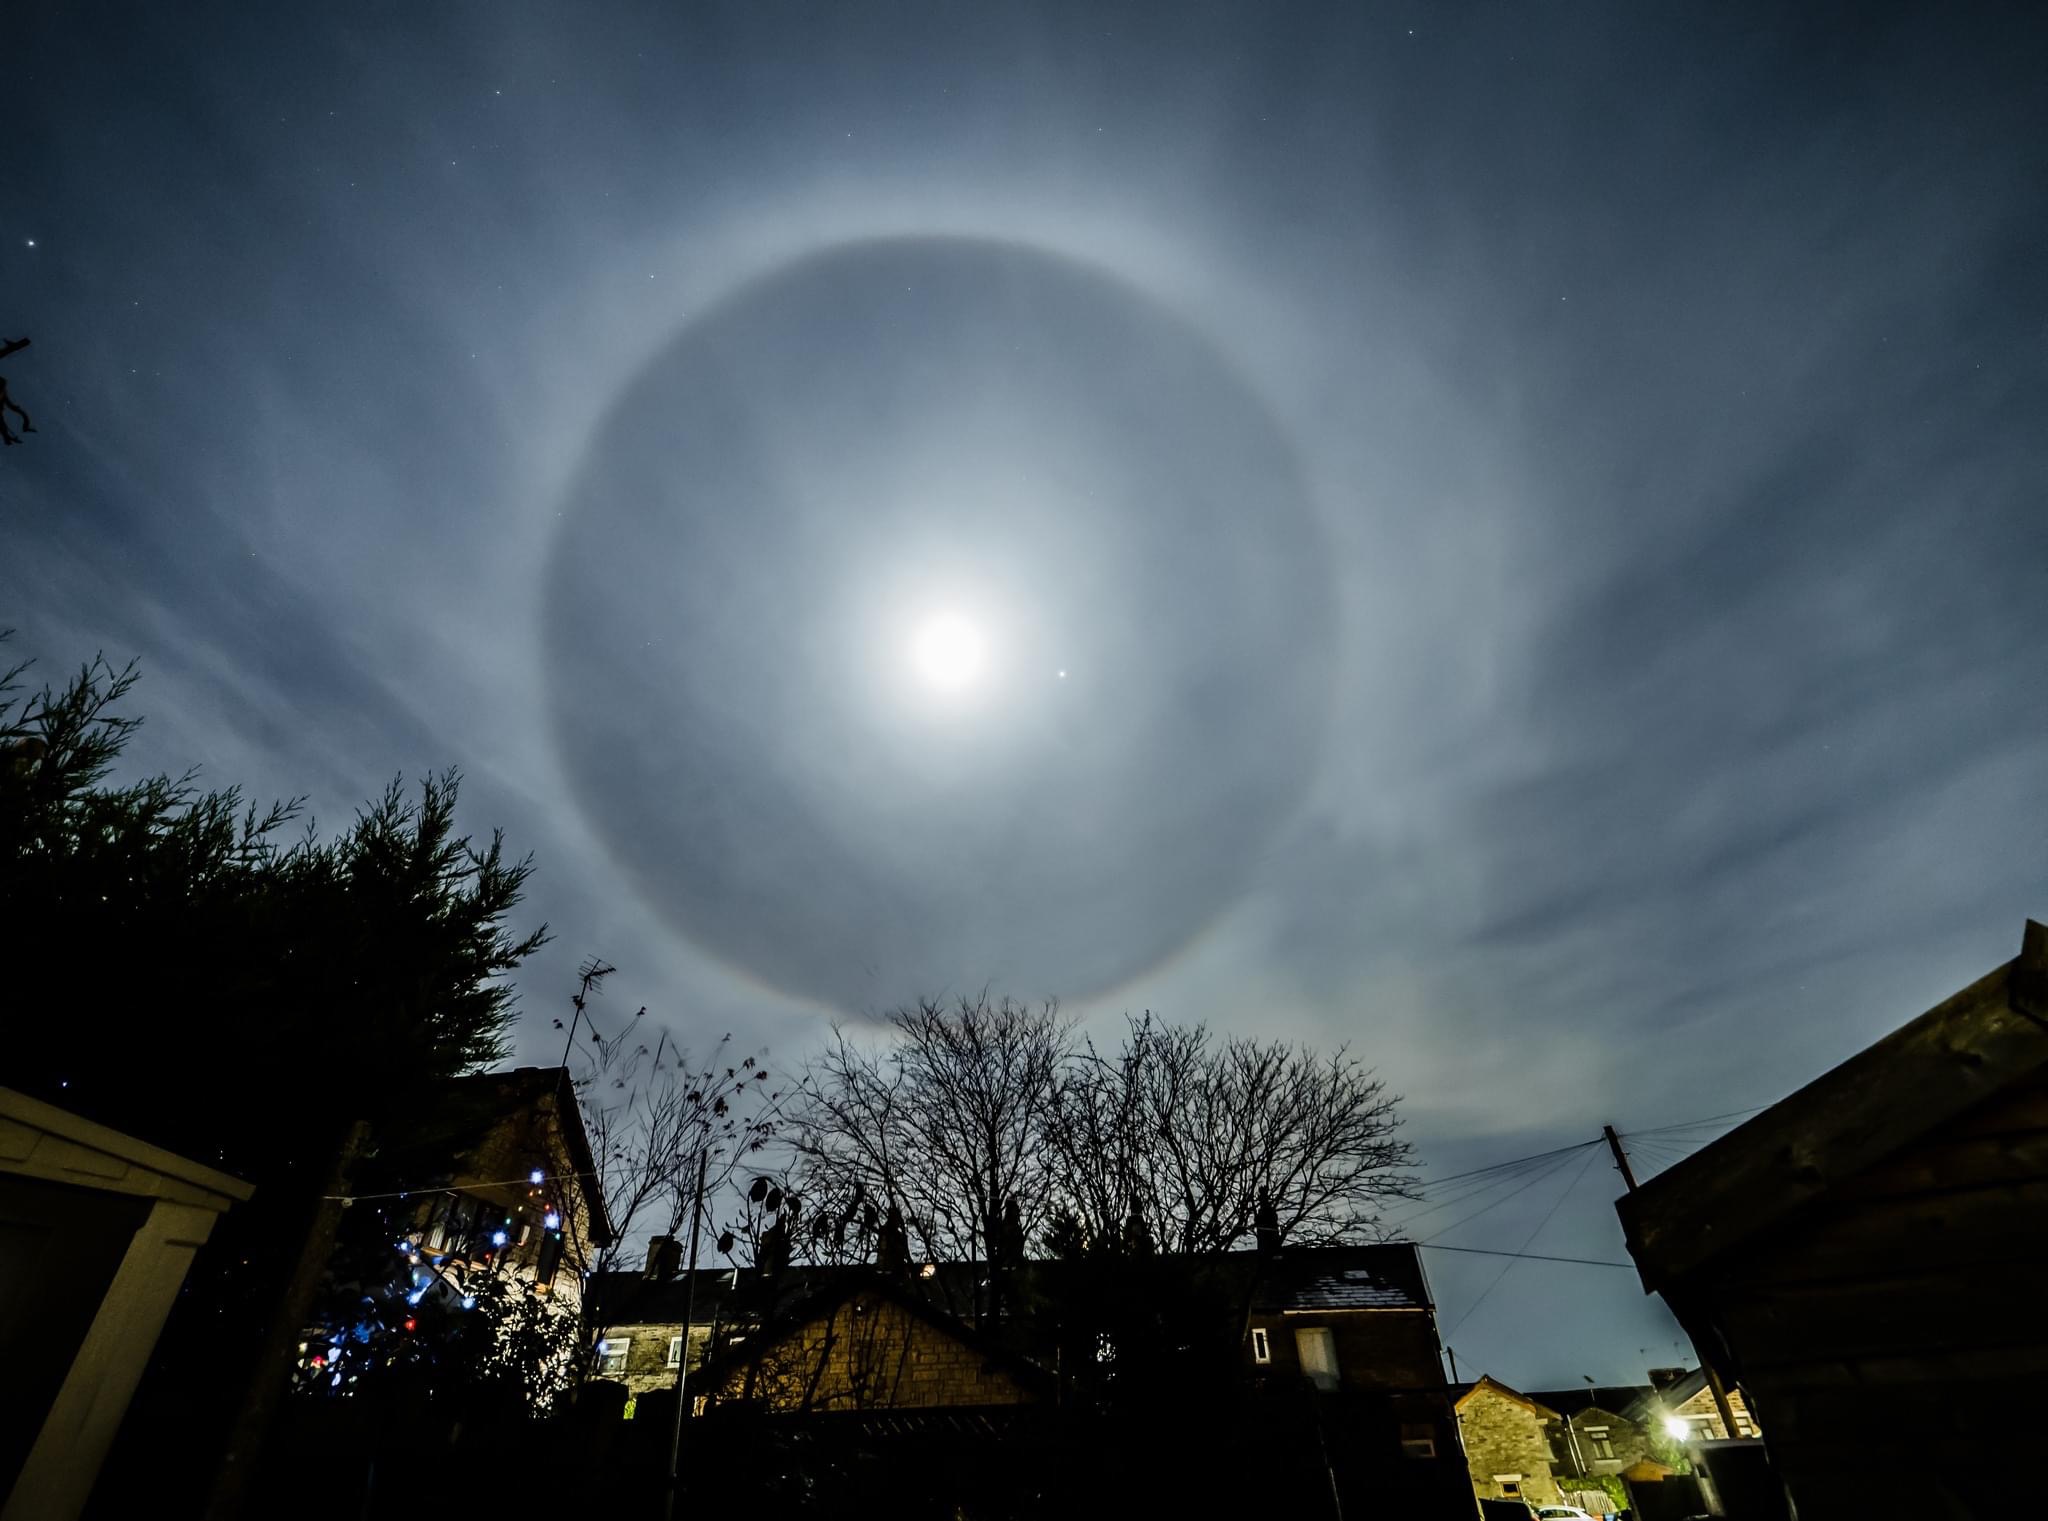 Moon halo seen in the skies tonight in natural phenomena